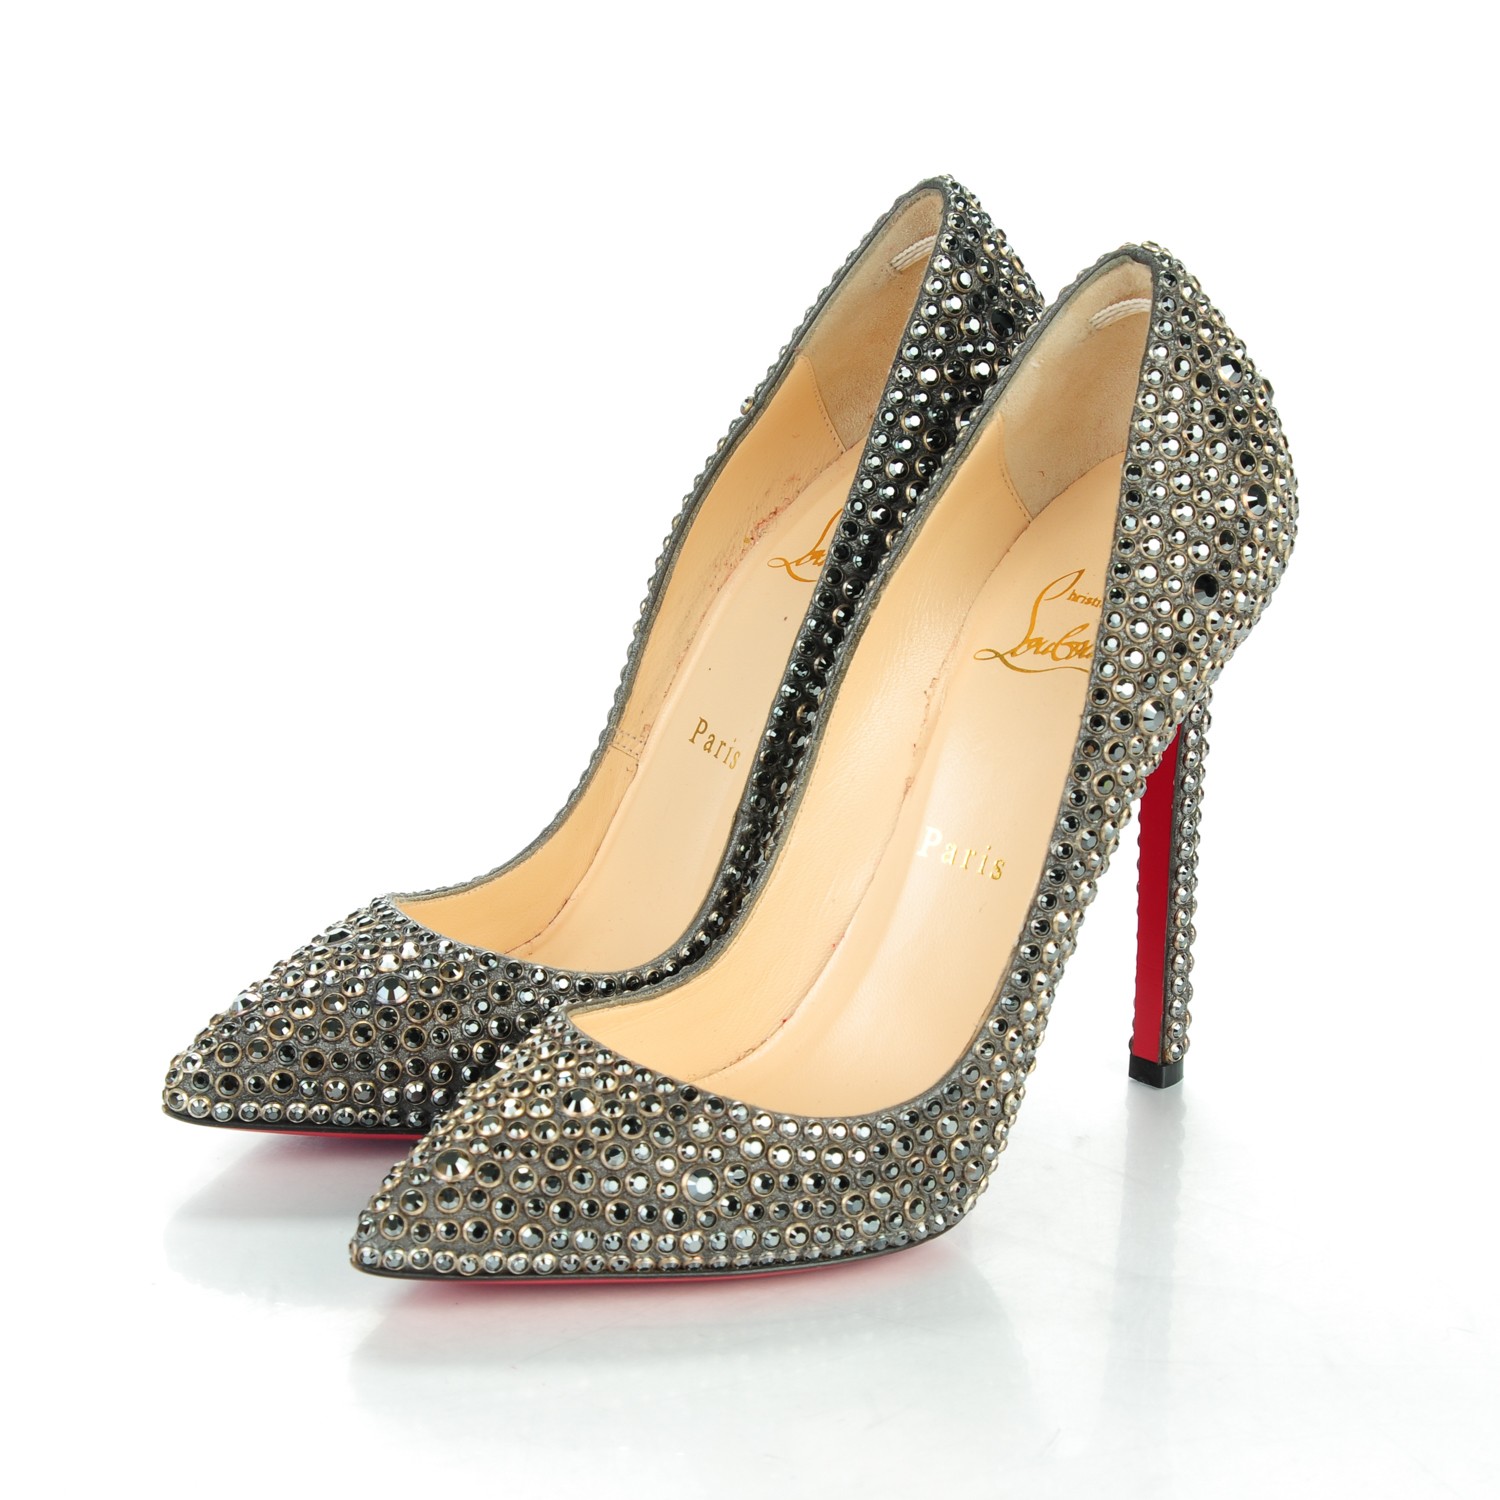 CHRISTIAN LOUBOUTIN Suede Burma Ring Strass Pigalle 120 Pumps 37 ...